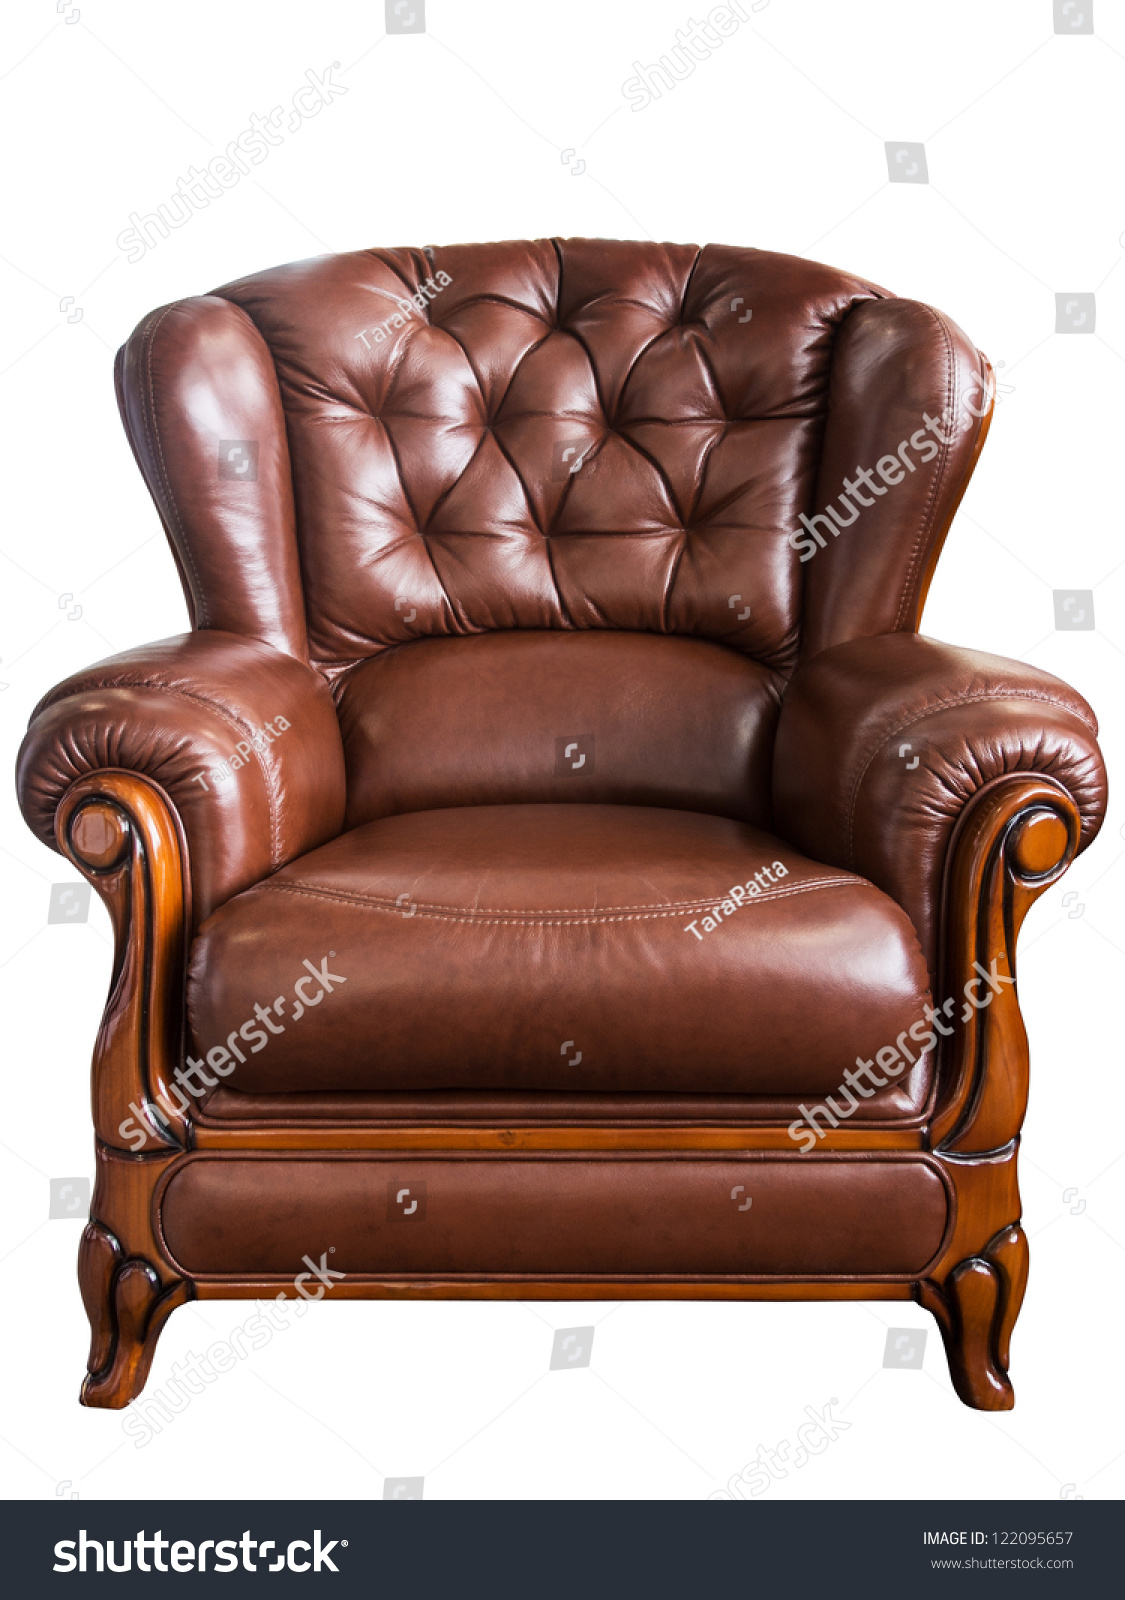 Old styled brown vintage armchair isolated on white background #122095657